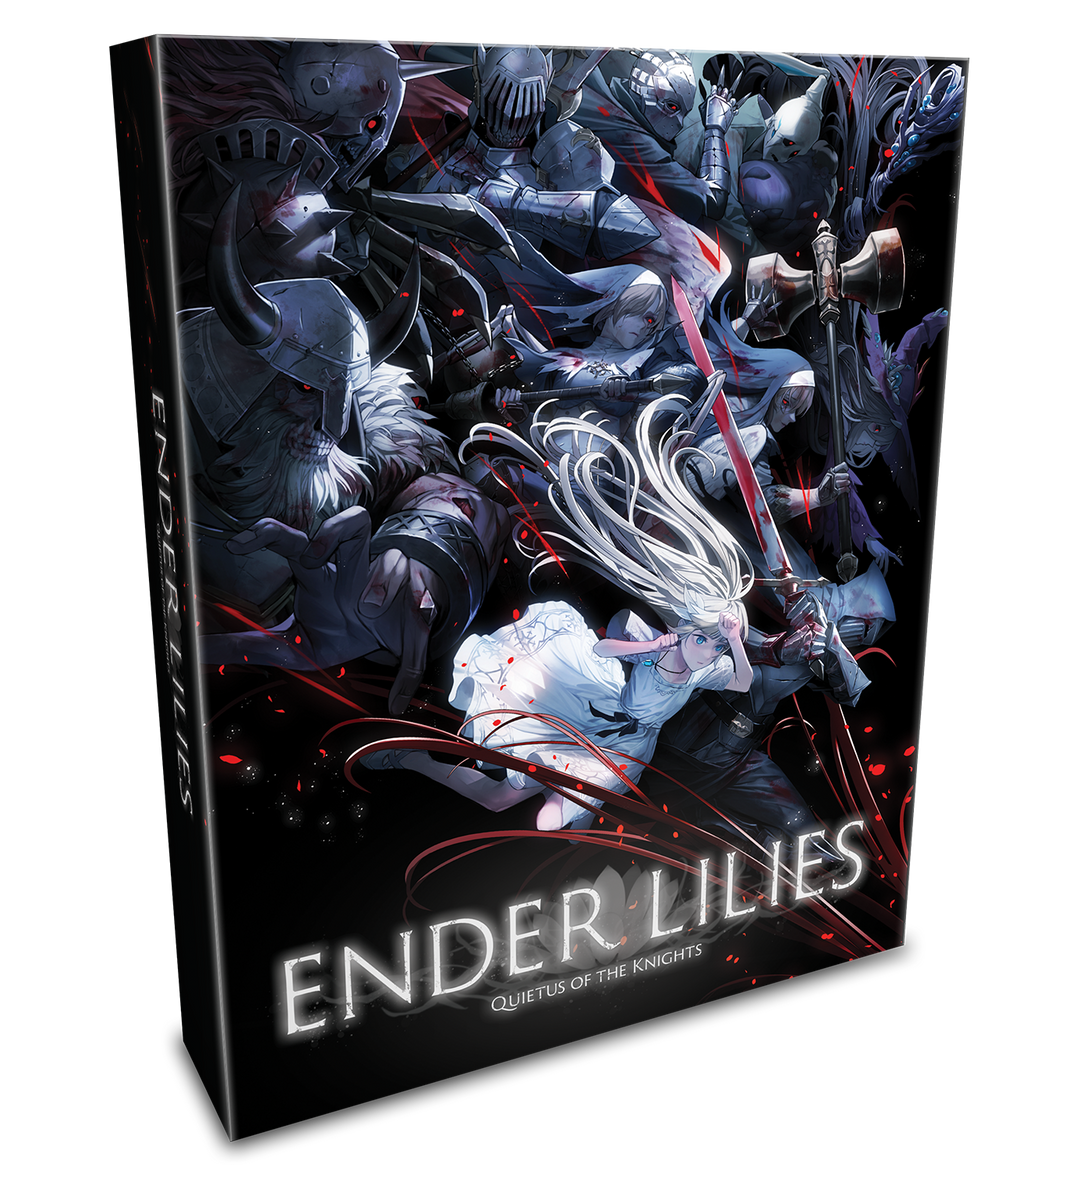 ENDER LILIES: Quietus of the Knights Collector's Edition (PS4